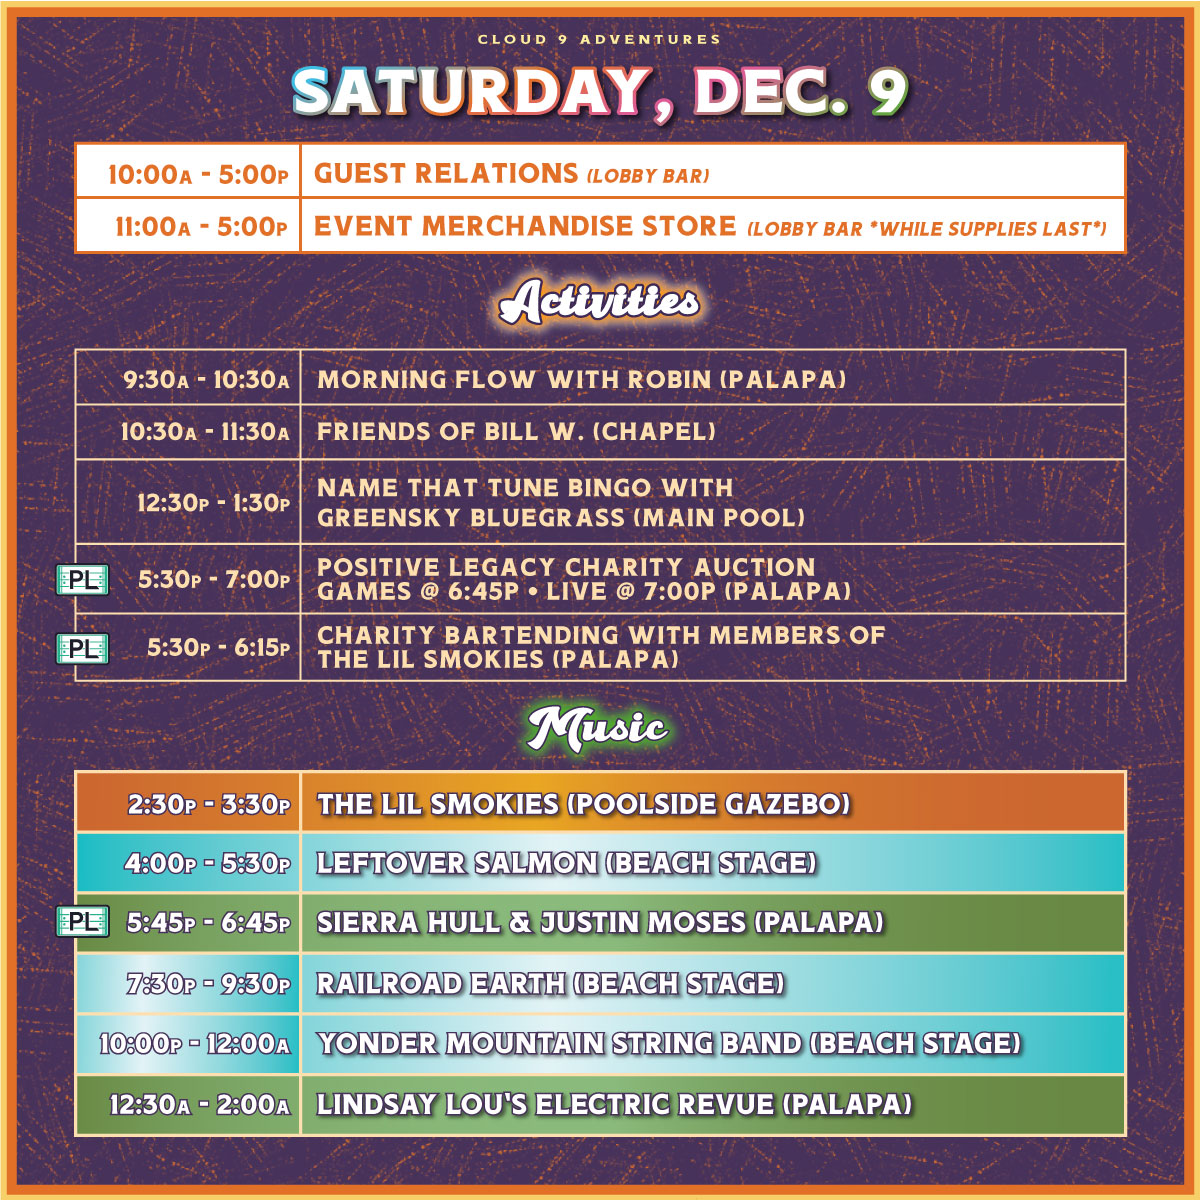 Your Strings & Sol 2023 Complete Schedule is here! 🪕☀️ Get ready for another unforgettable adventure together! Don't miss Day 3's Theme Night - we want to see all the holidays out to party! 🎉